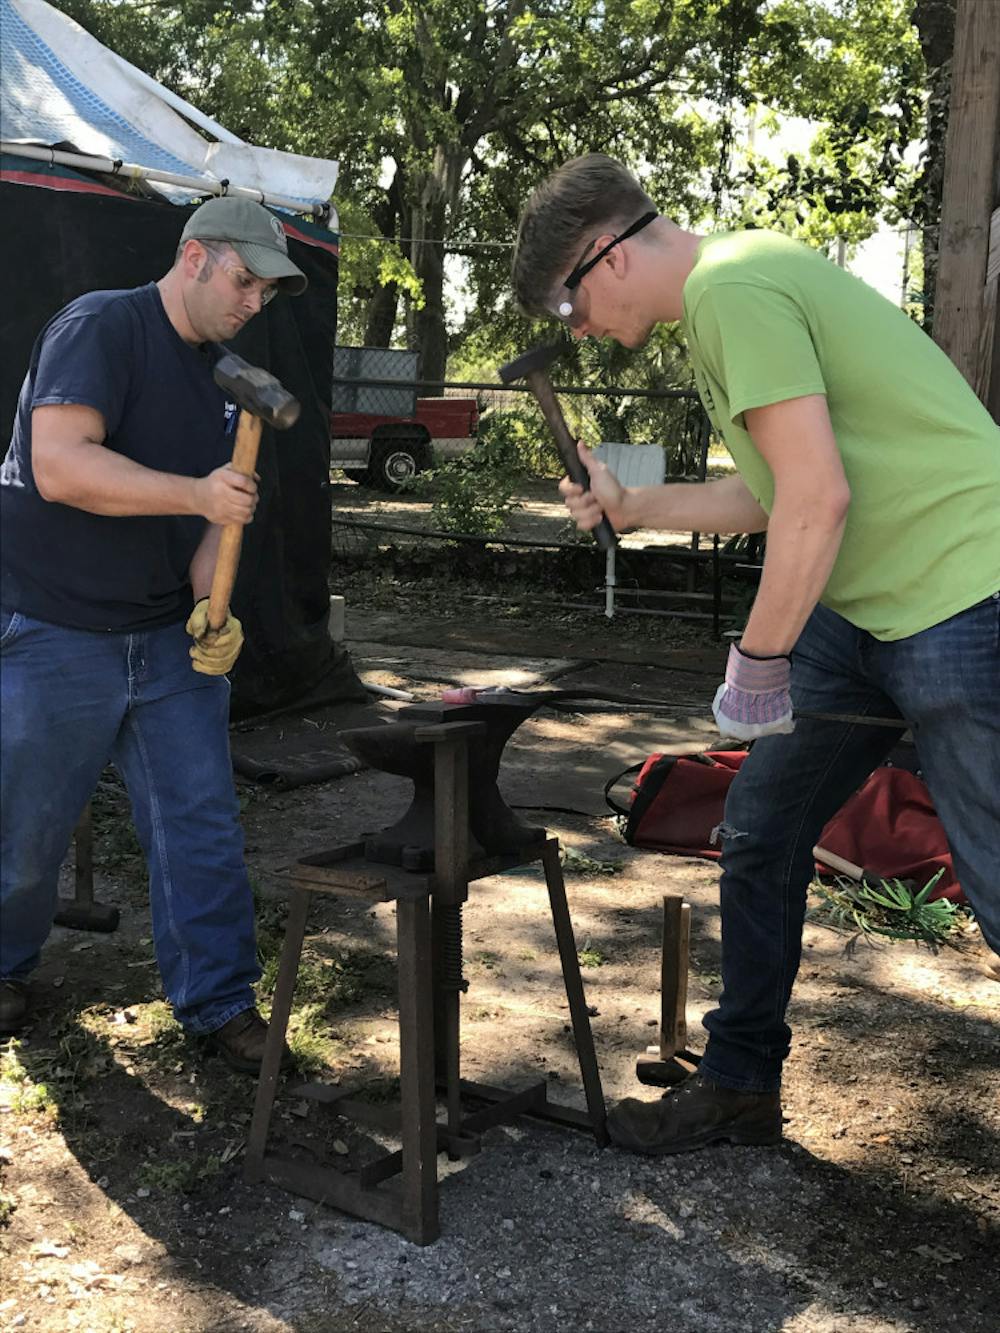 <p><span>Thirty-one-year-old John Carter (left) and 26-year-old Martin Kipp team up to mold their mall pein hammer into an axe using a technique called forging.</span></p>